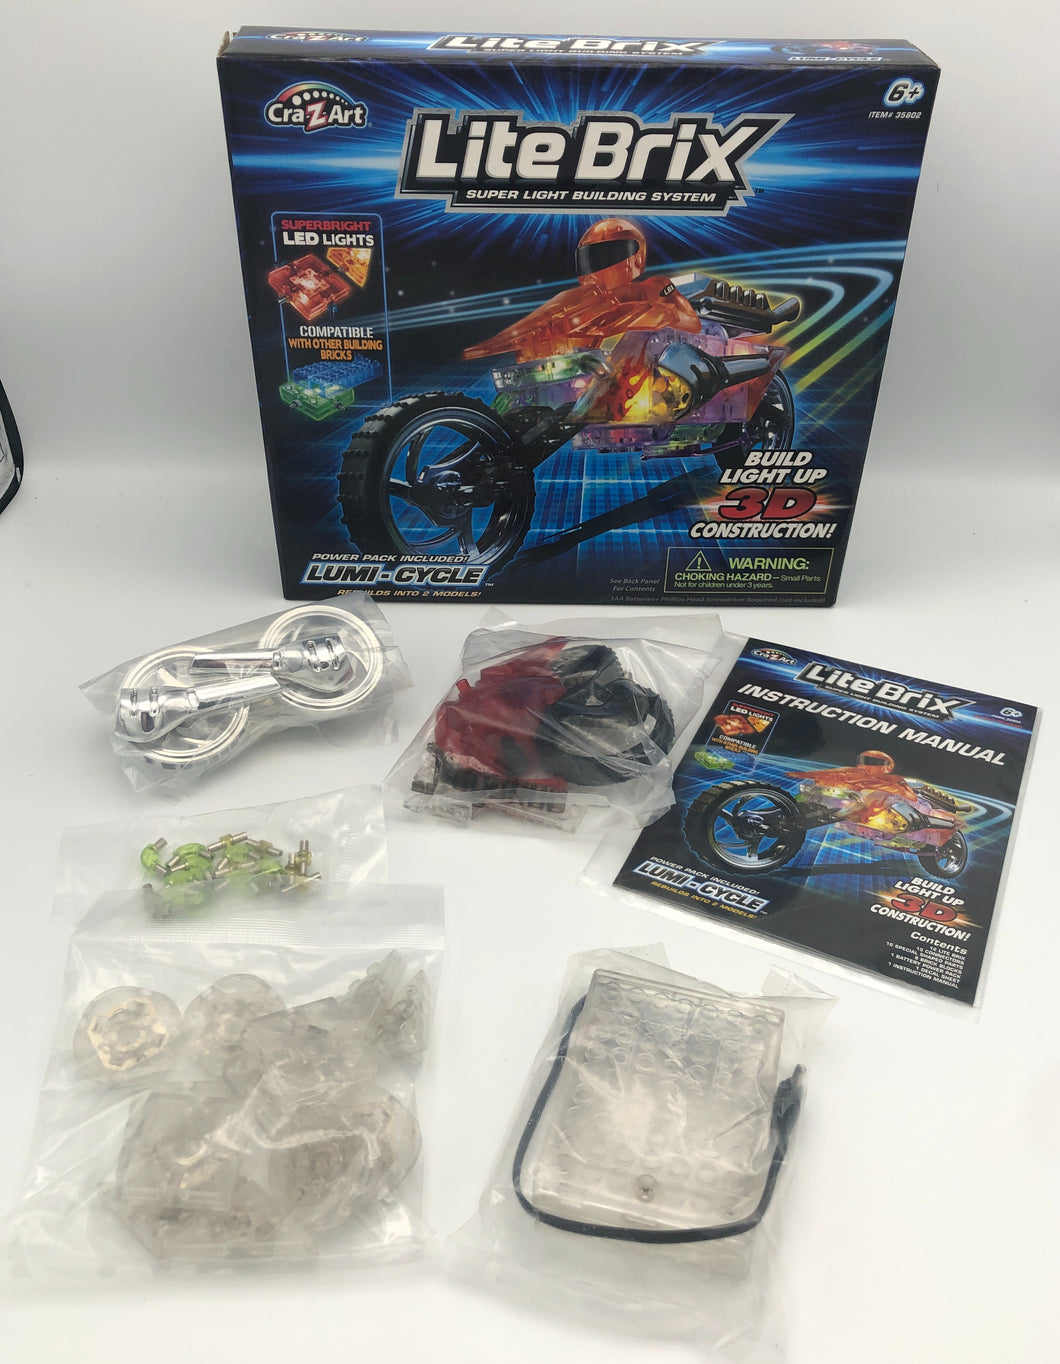 NEW Lite Brix Super Light Building System -- LUMI-CYCLE Compatible with LEGO